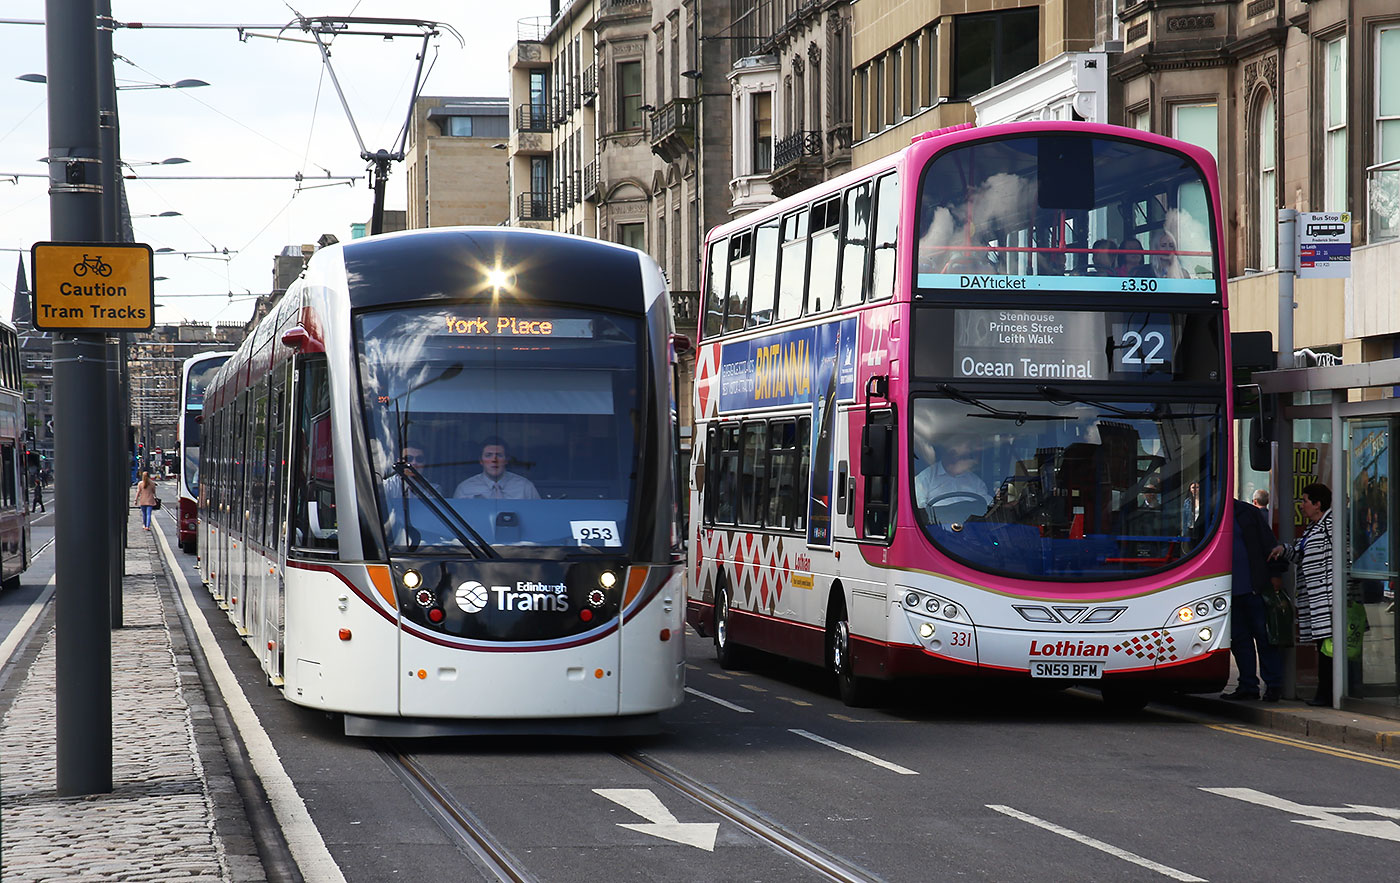 Tram and Bus in Princes Street, mid-March 2014.  The bus is in the new branded livery for Route 26